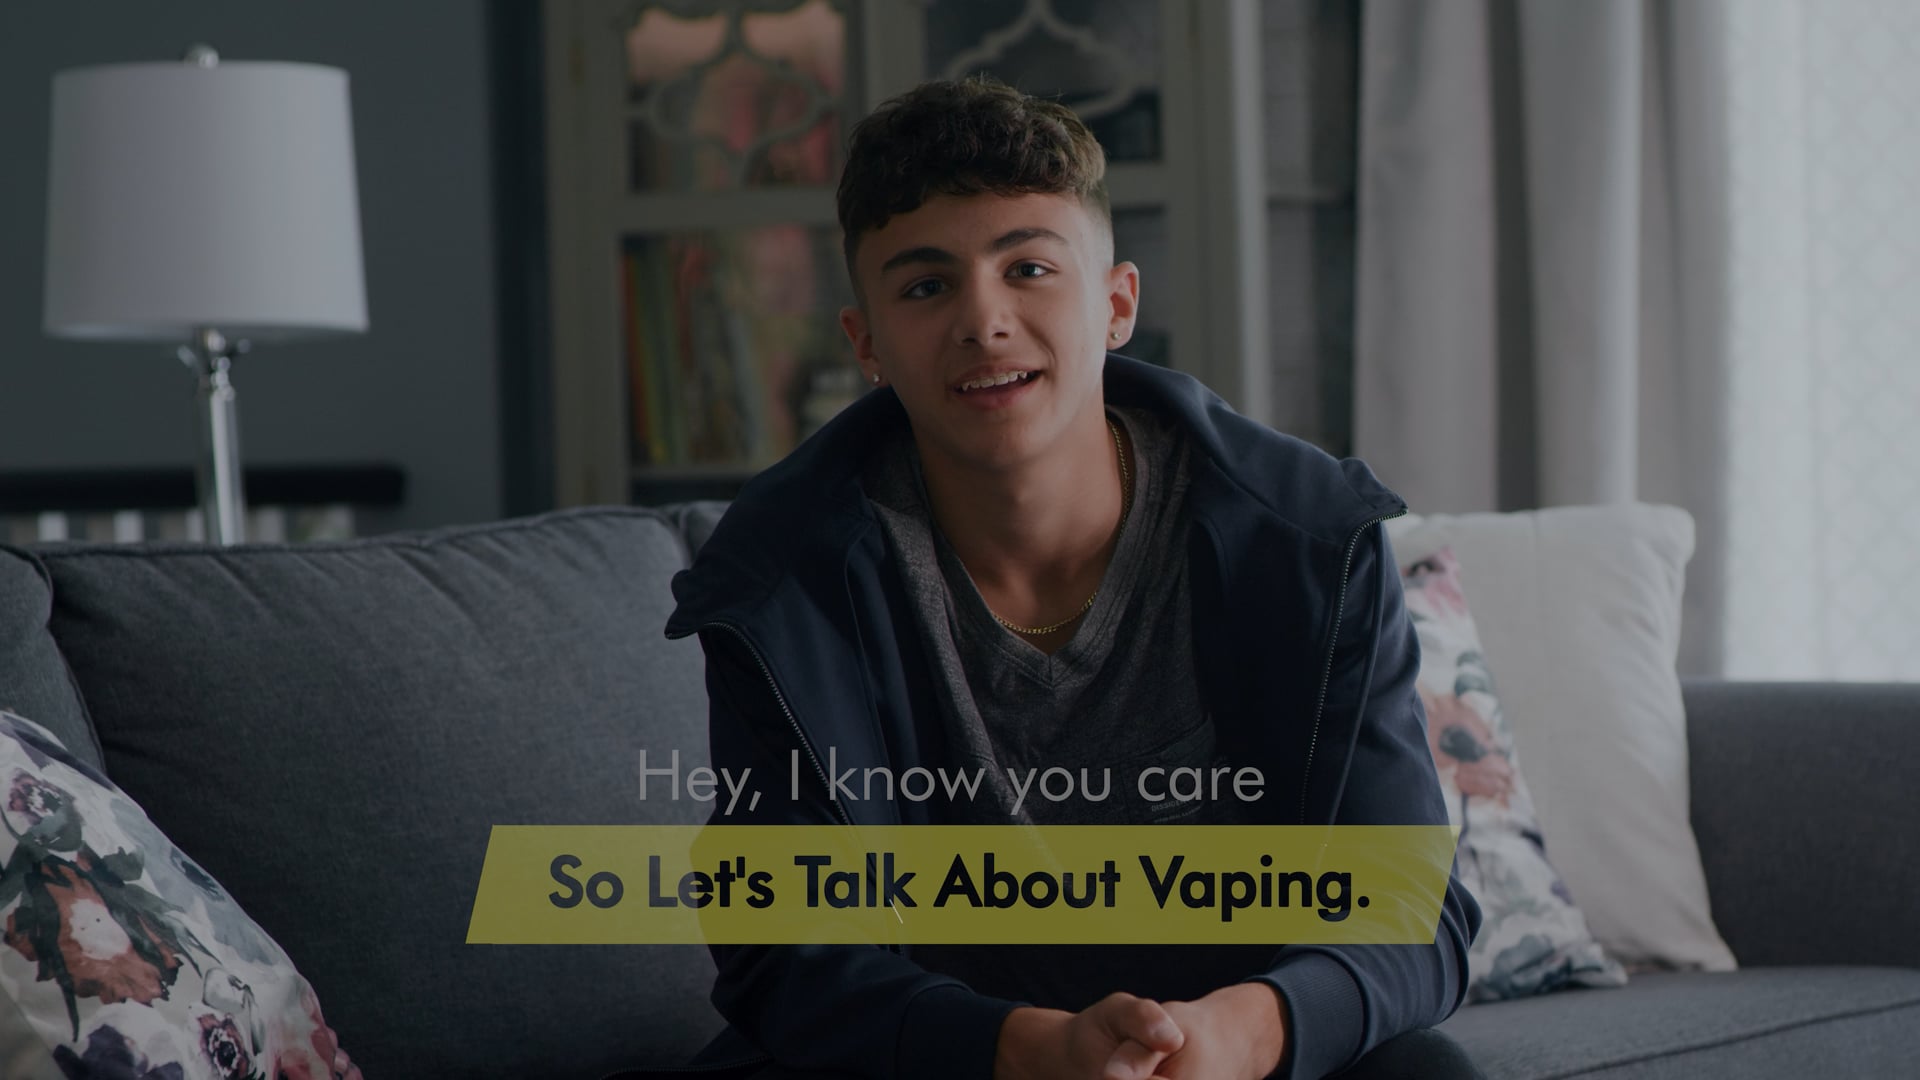 Let's Talk About Vaping - Social Influence